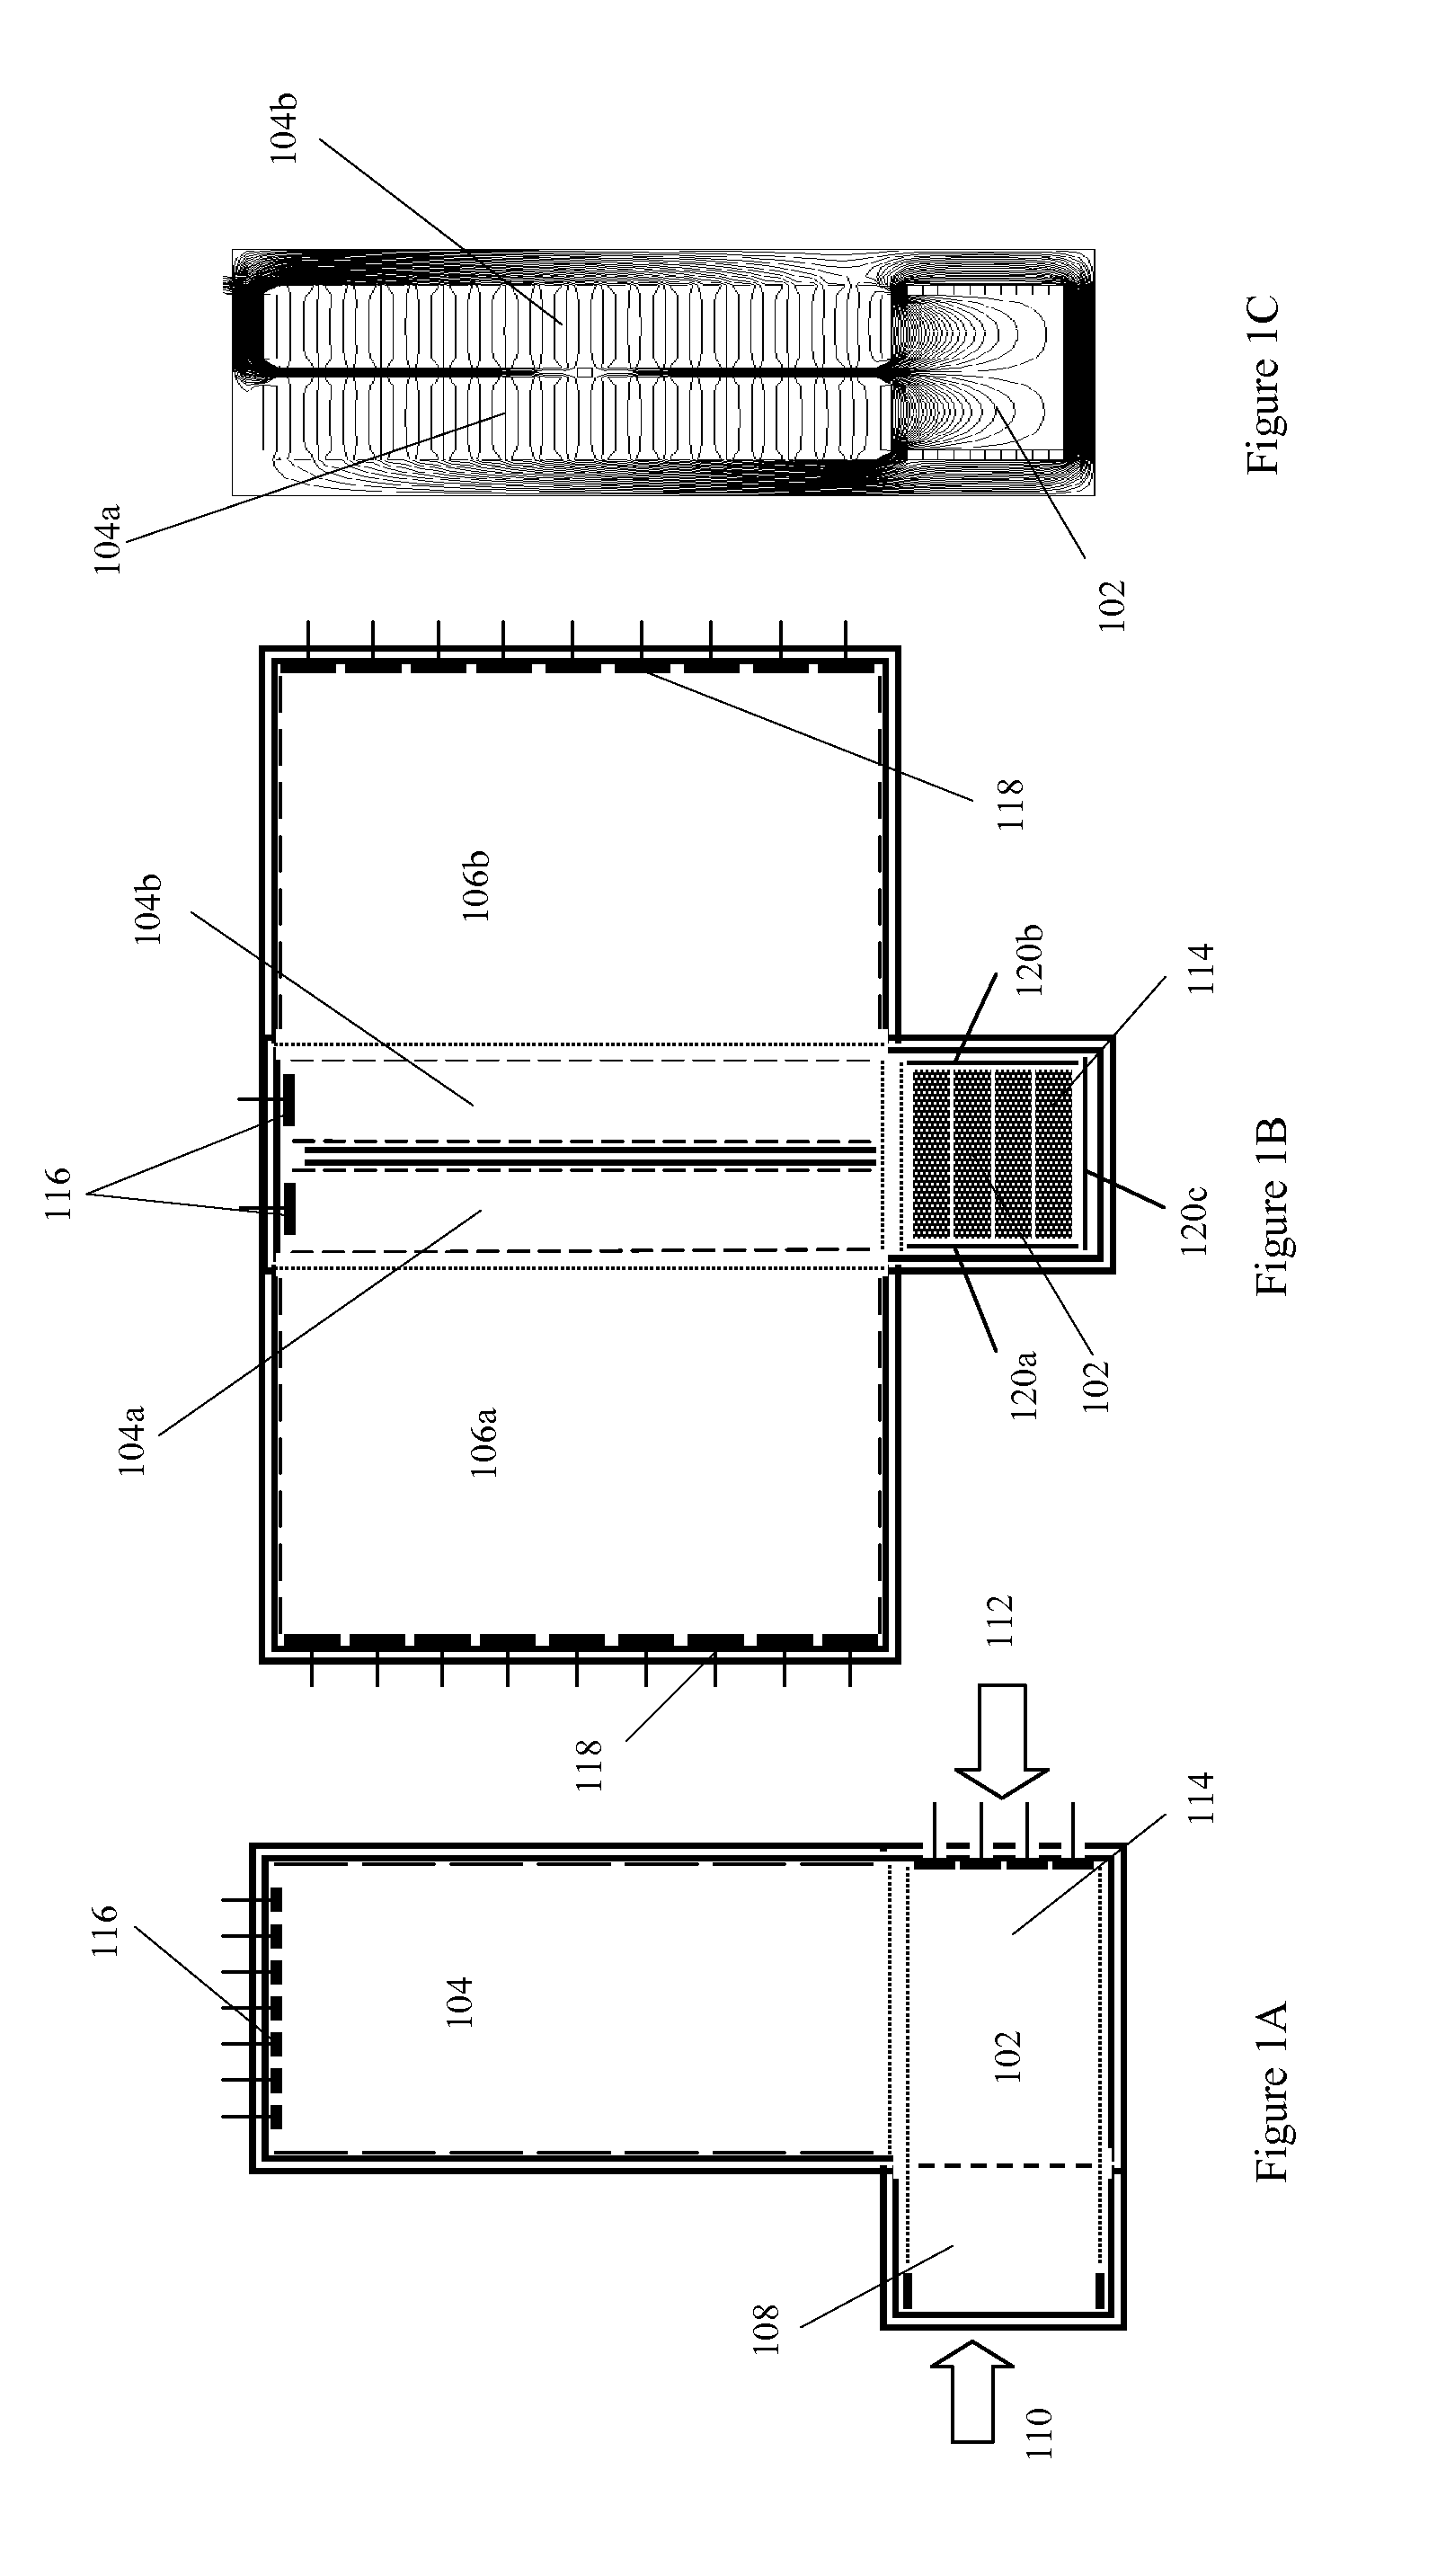 High performance ion mobility spectrometer apparatus and methods